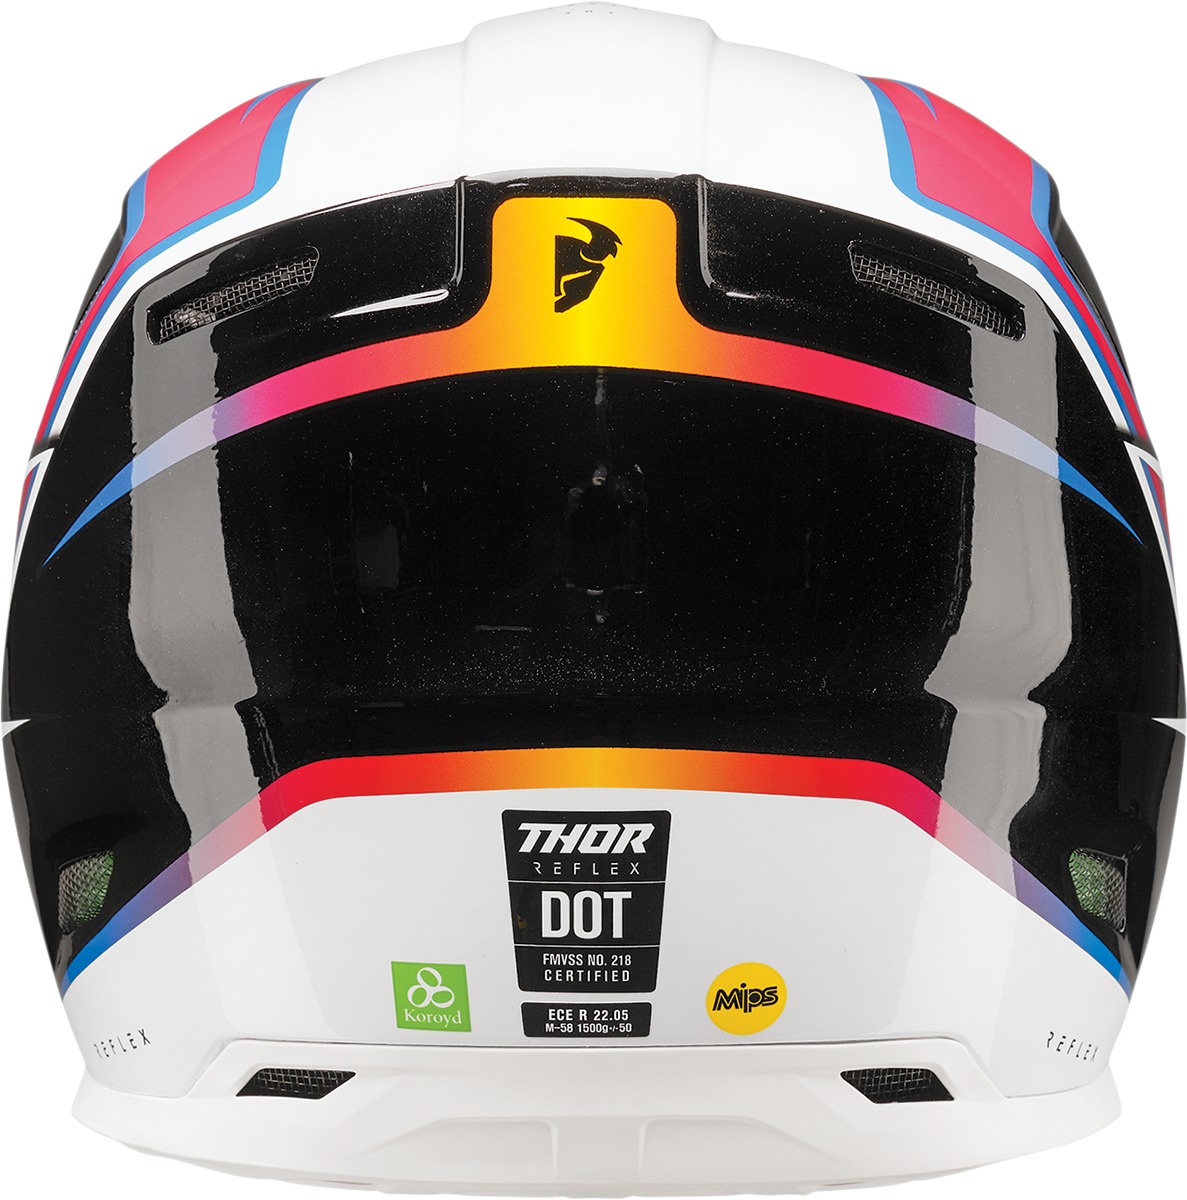 Reflex Accel MIPS Full Face Offroad Helmet Gloss Multi X-Small - Click Image to Close